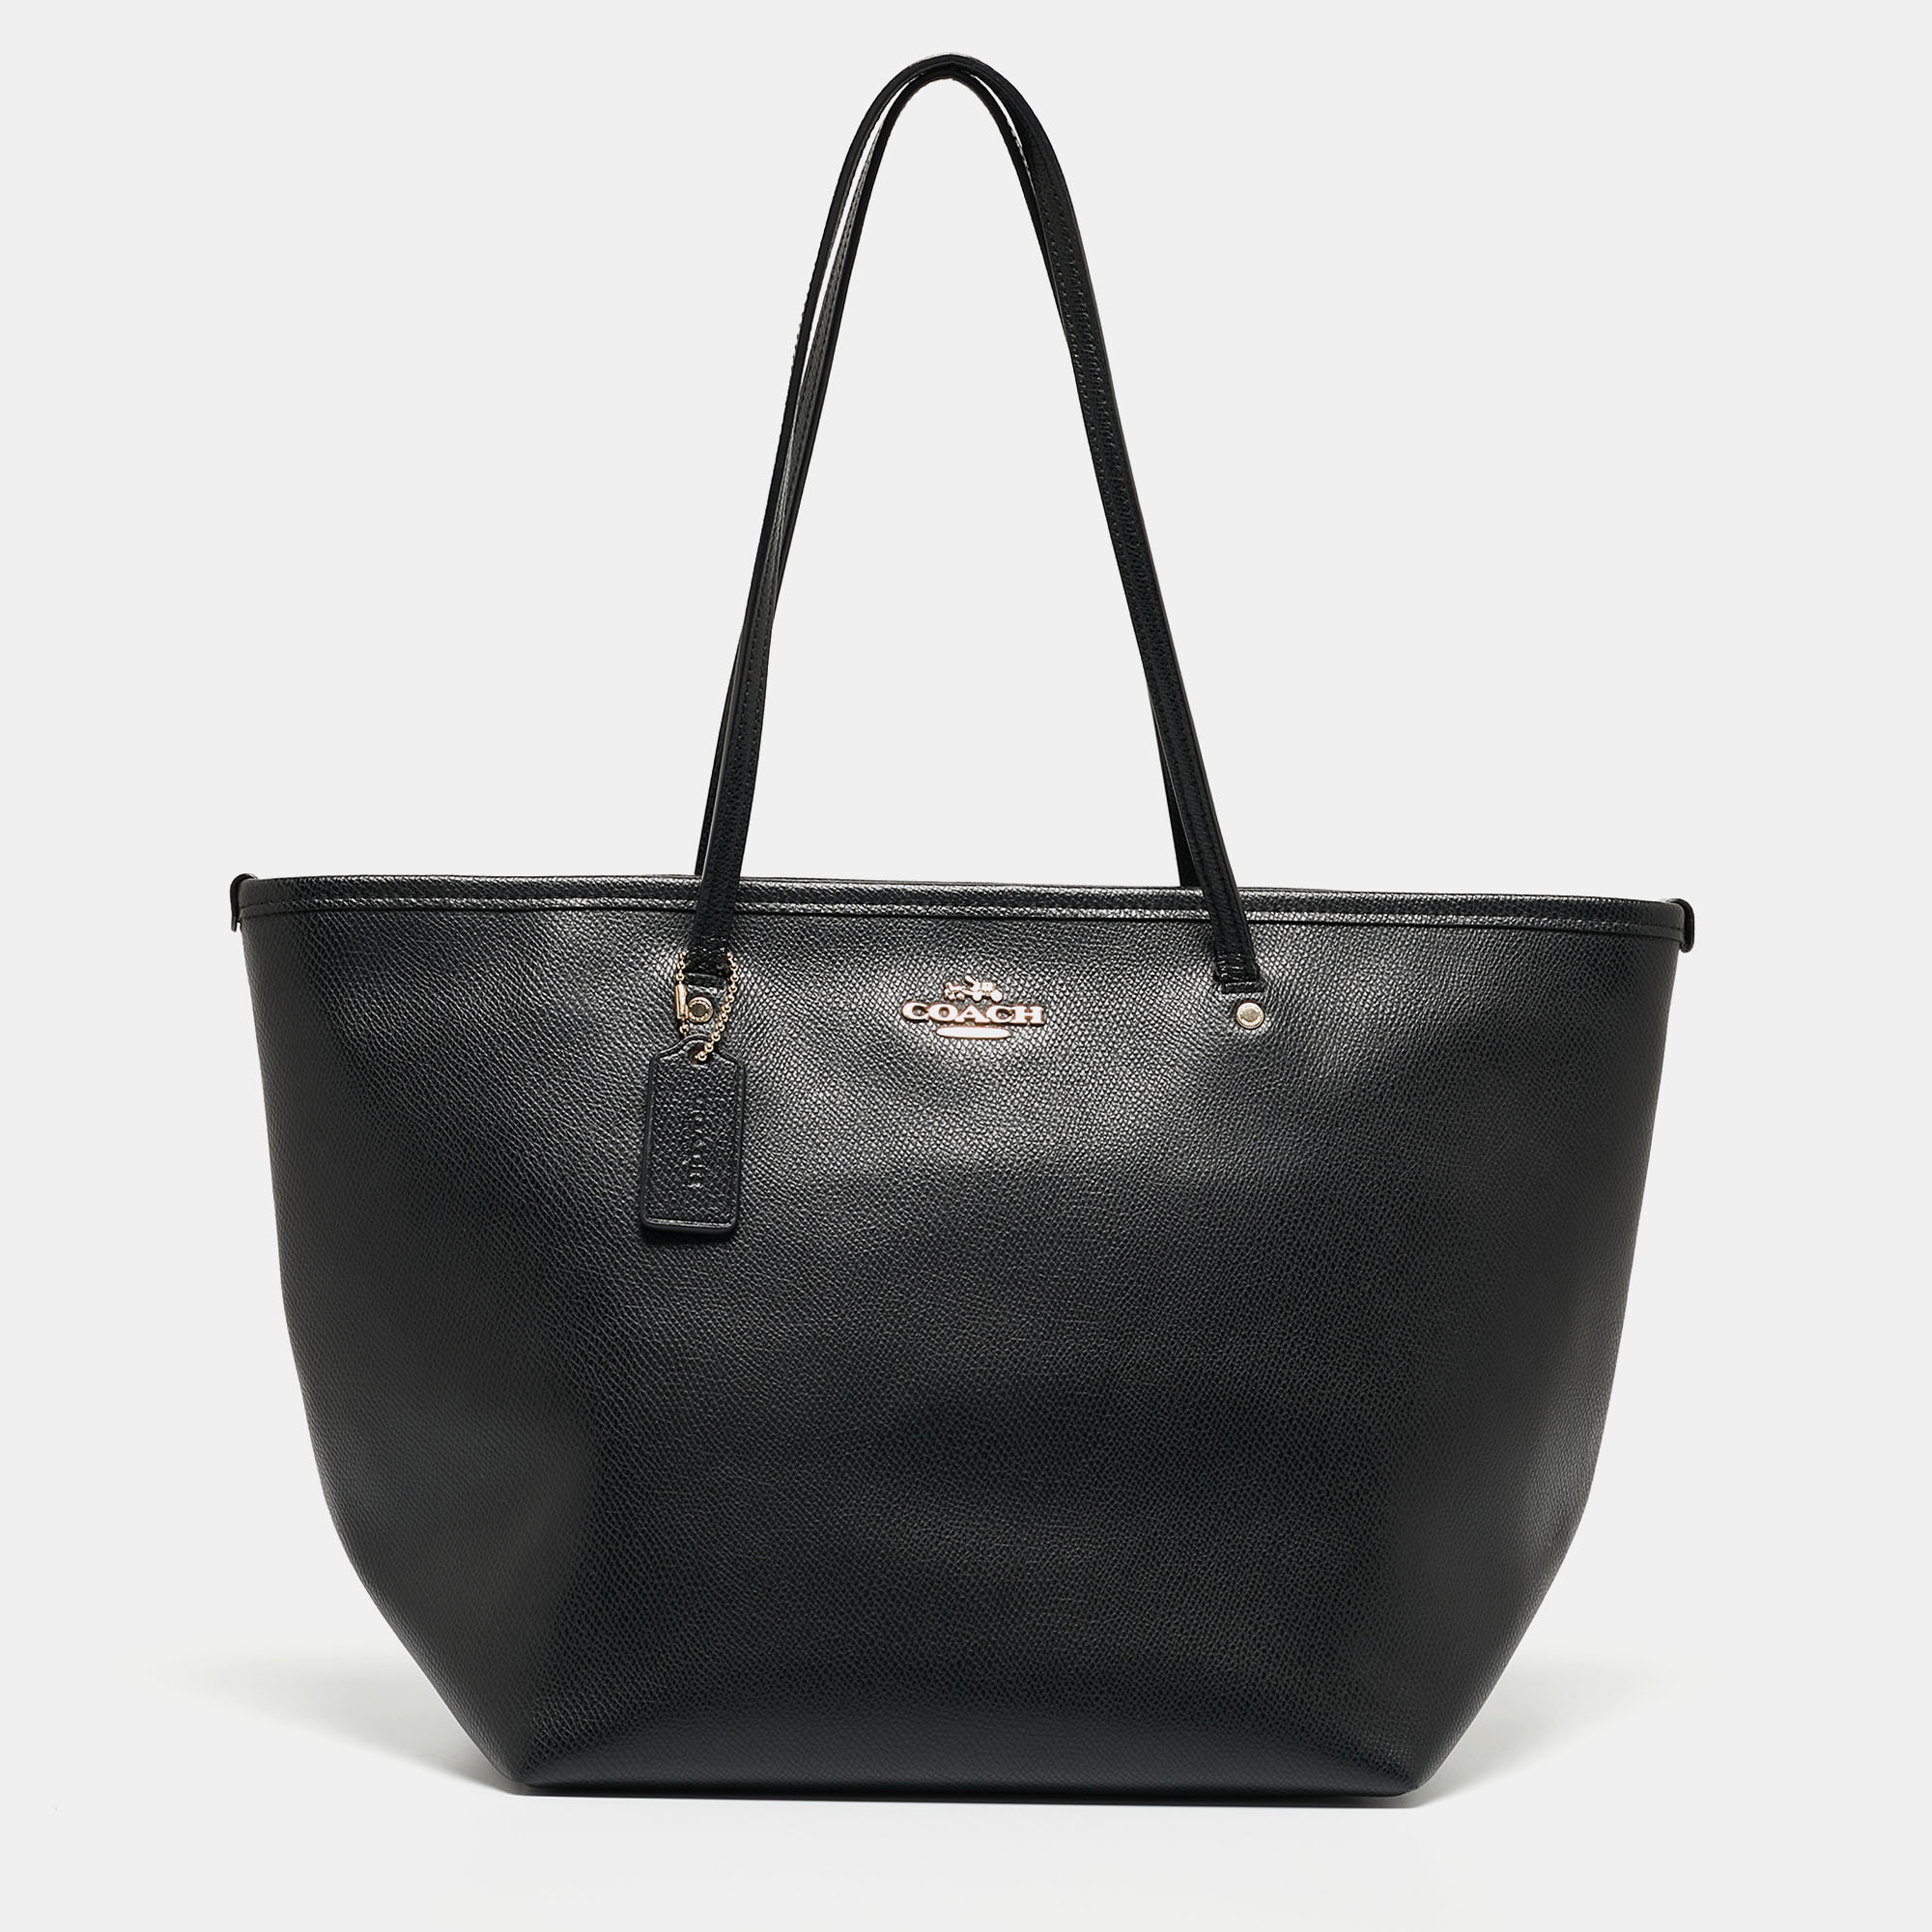 Coach Black Leather City Top Zip Tote